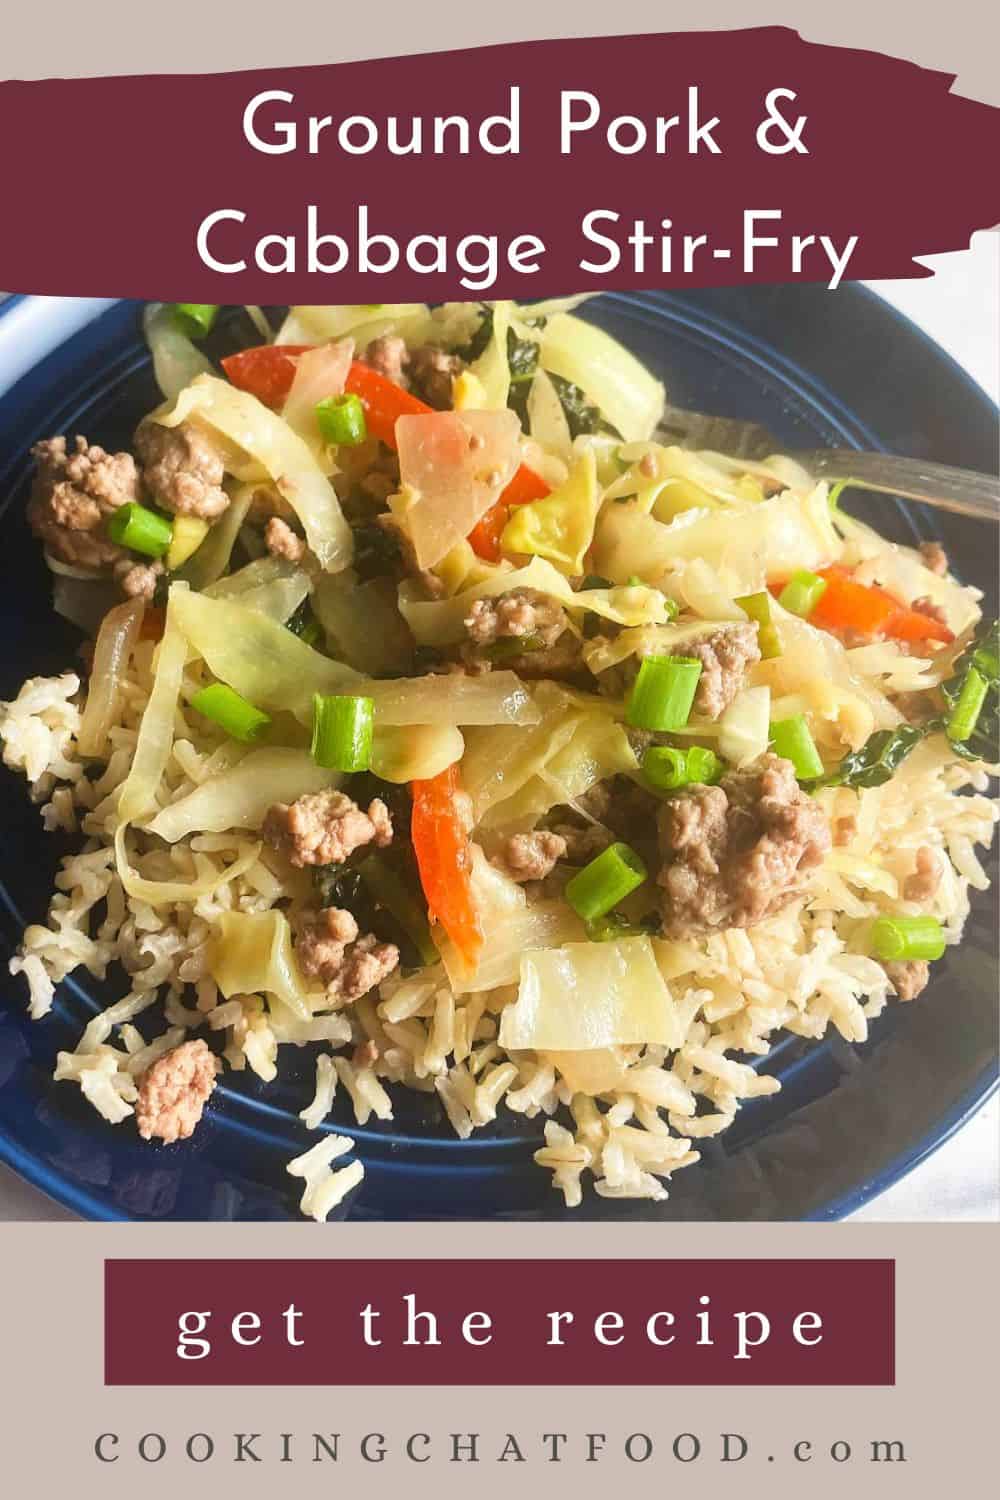 Text that says "Ground Pork and Cabbage Stir-fry" with a photo of the dish underneath the text.